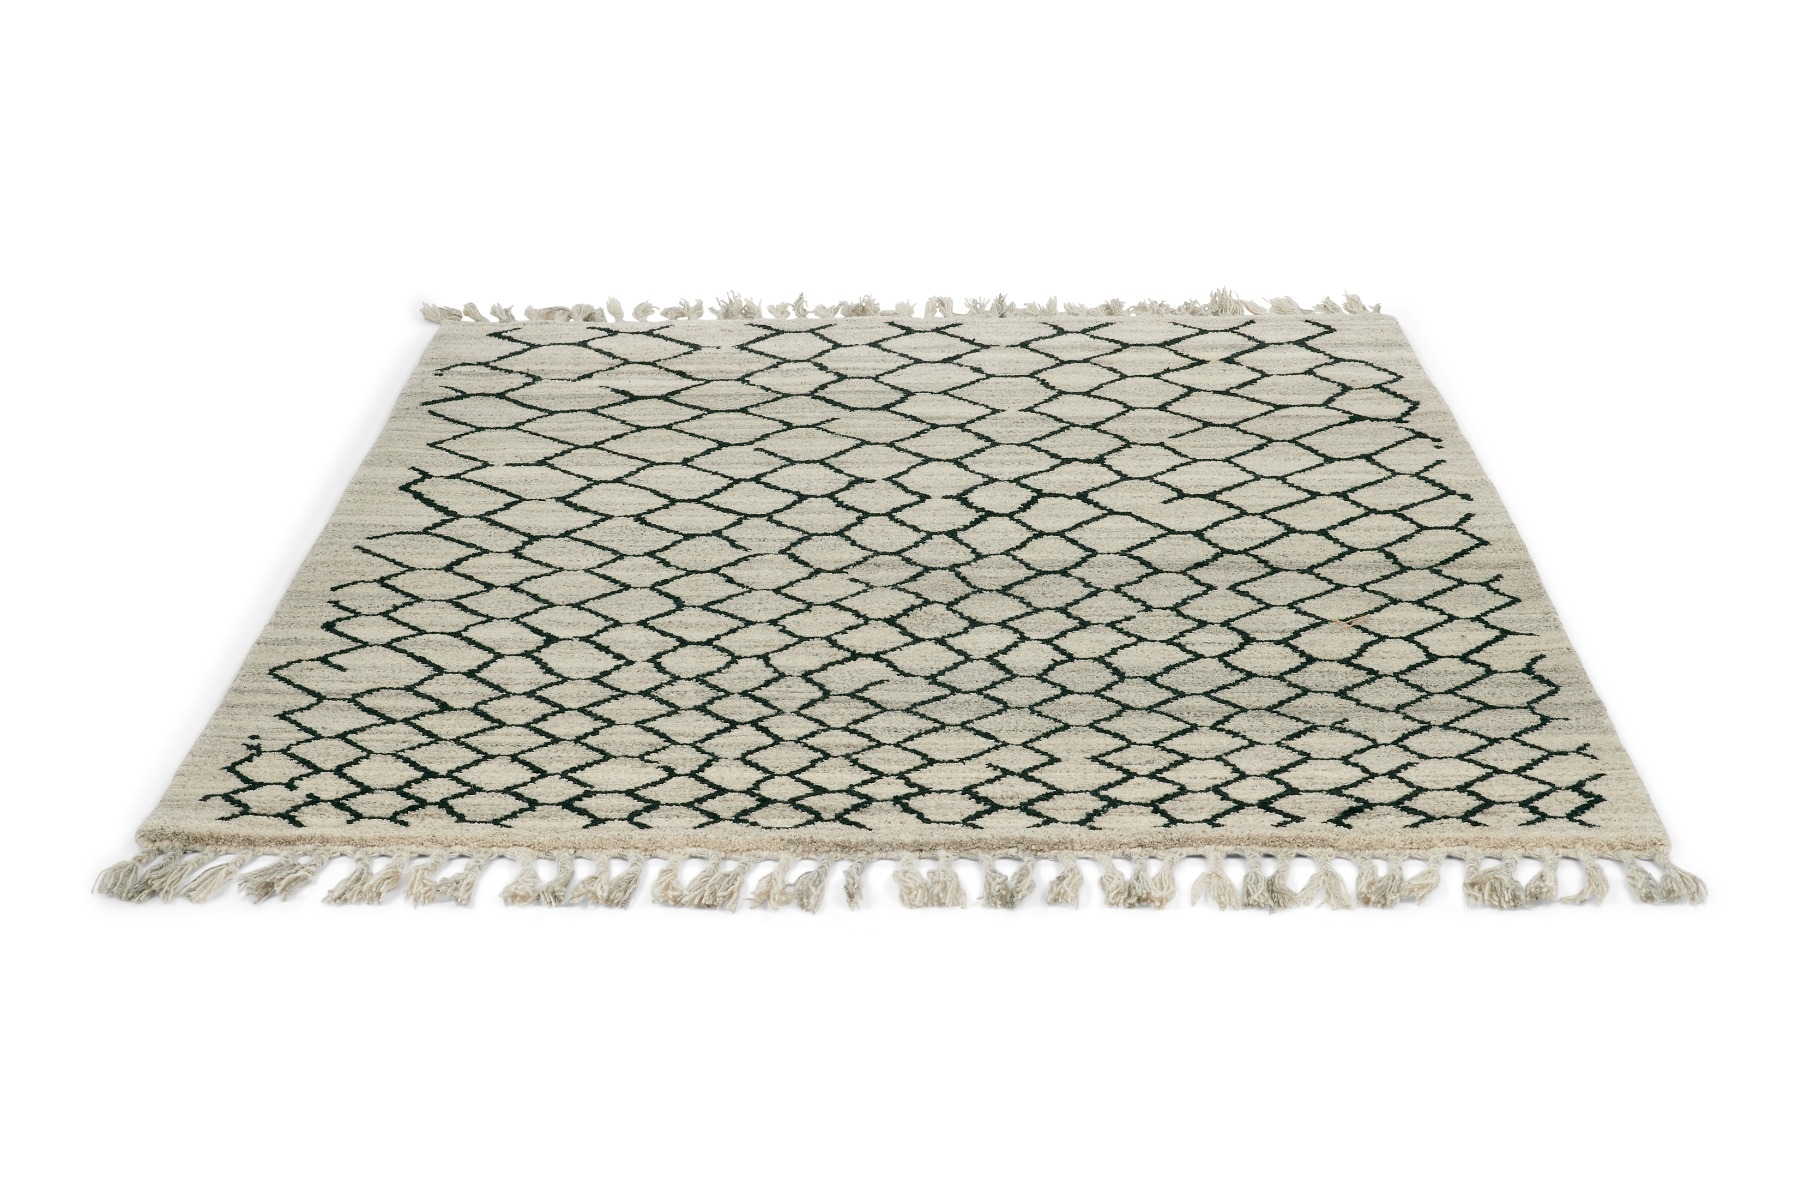 Hexacon Handknotted Rug ☞ Size: 200 x 300 cm